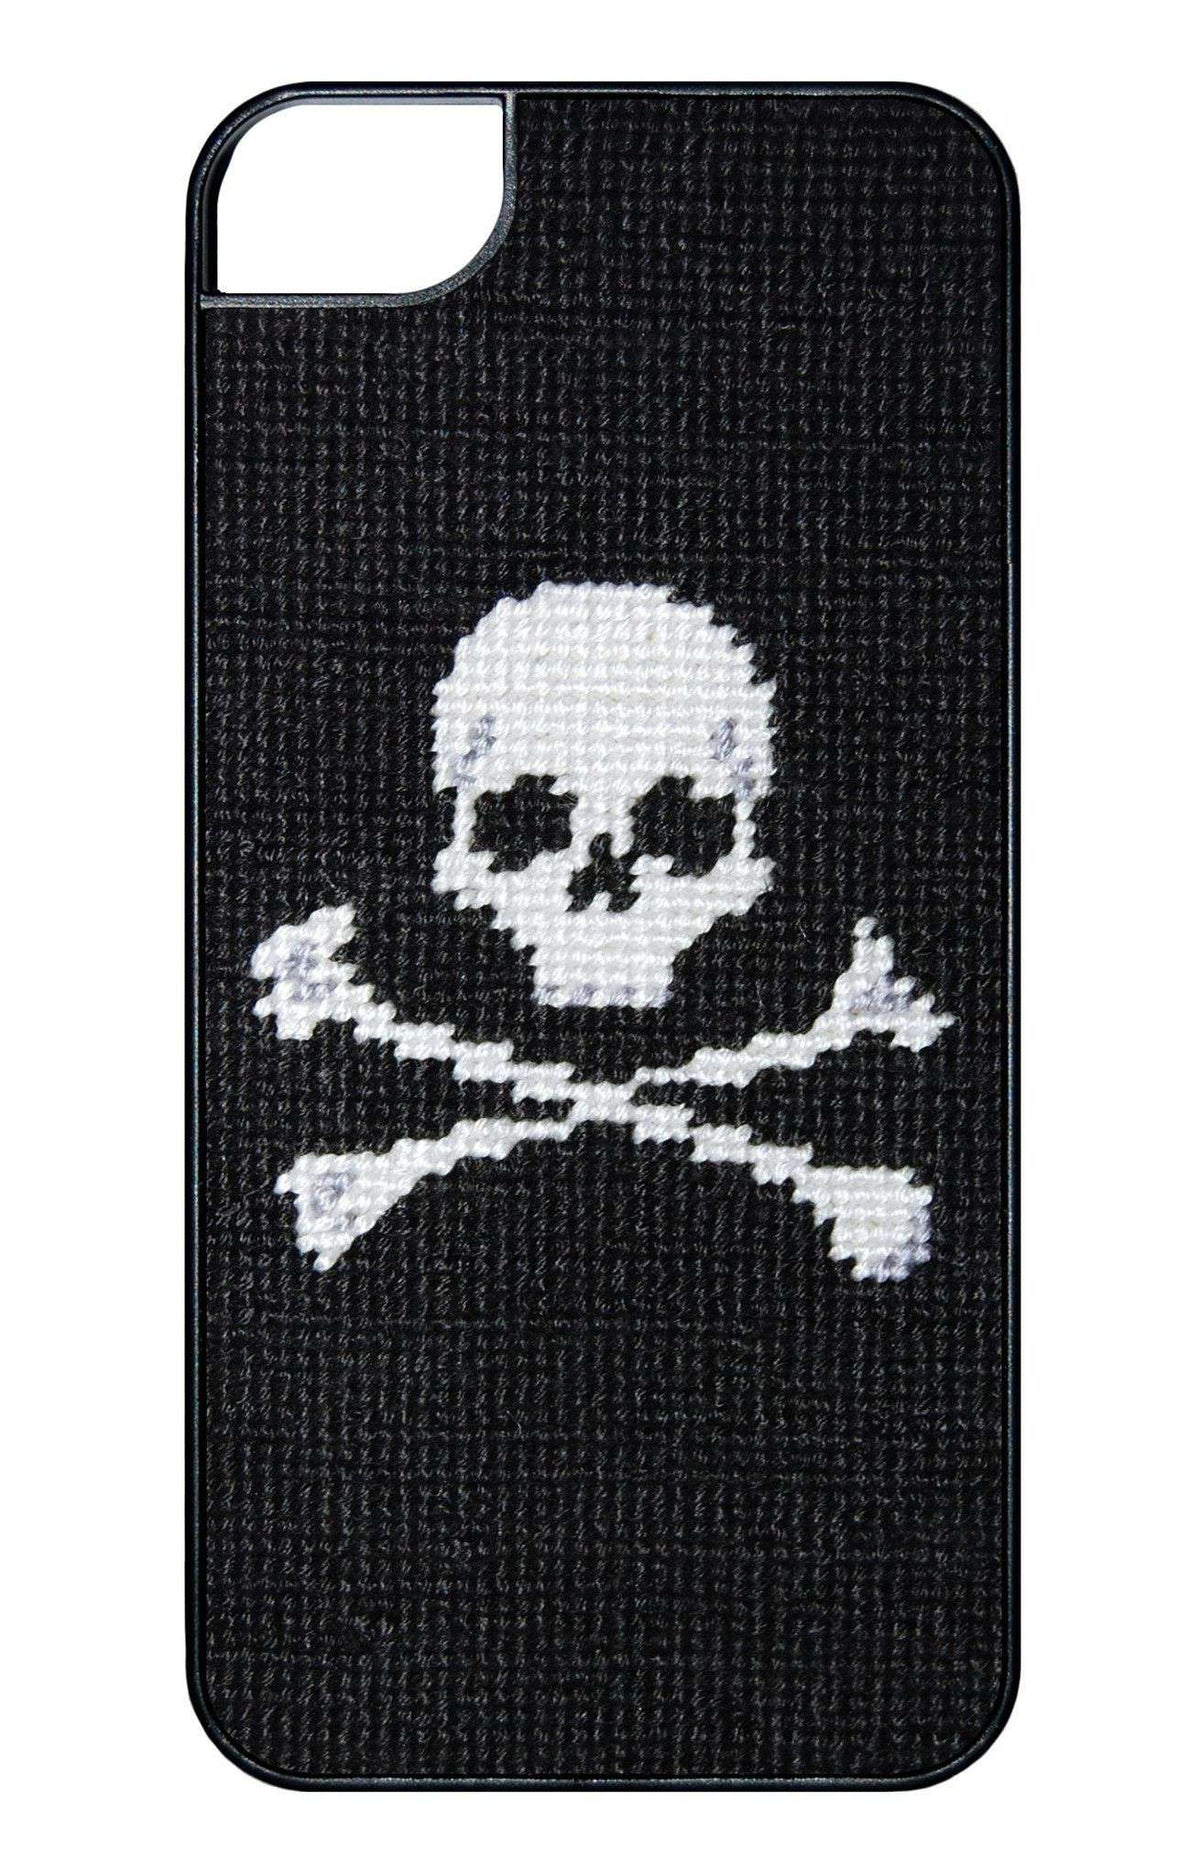 Jolly Roger Needlepoint iPhone 6 Case by Smathers & Branson - Country Club Prep